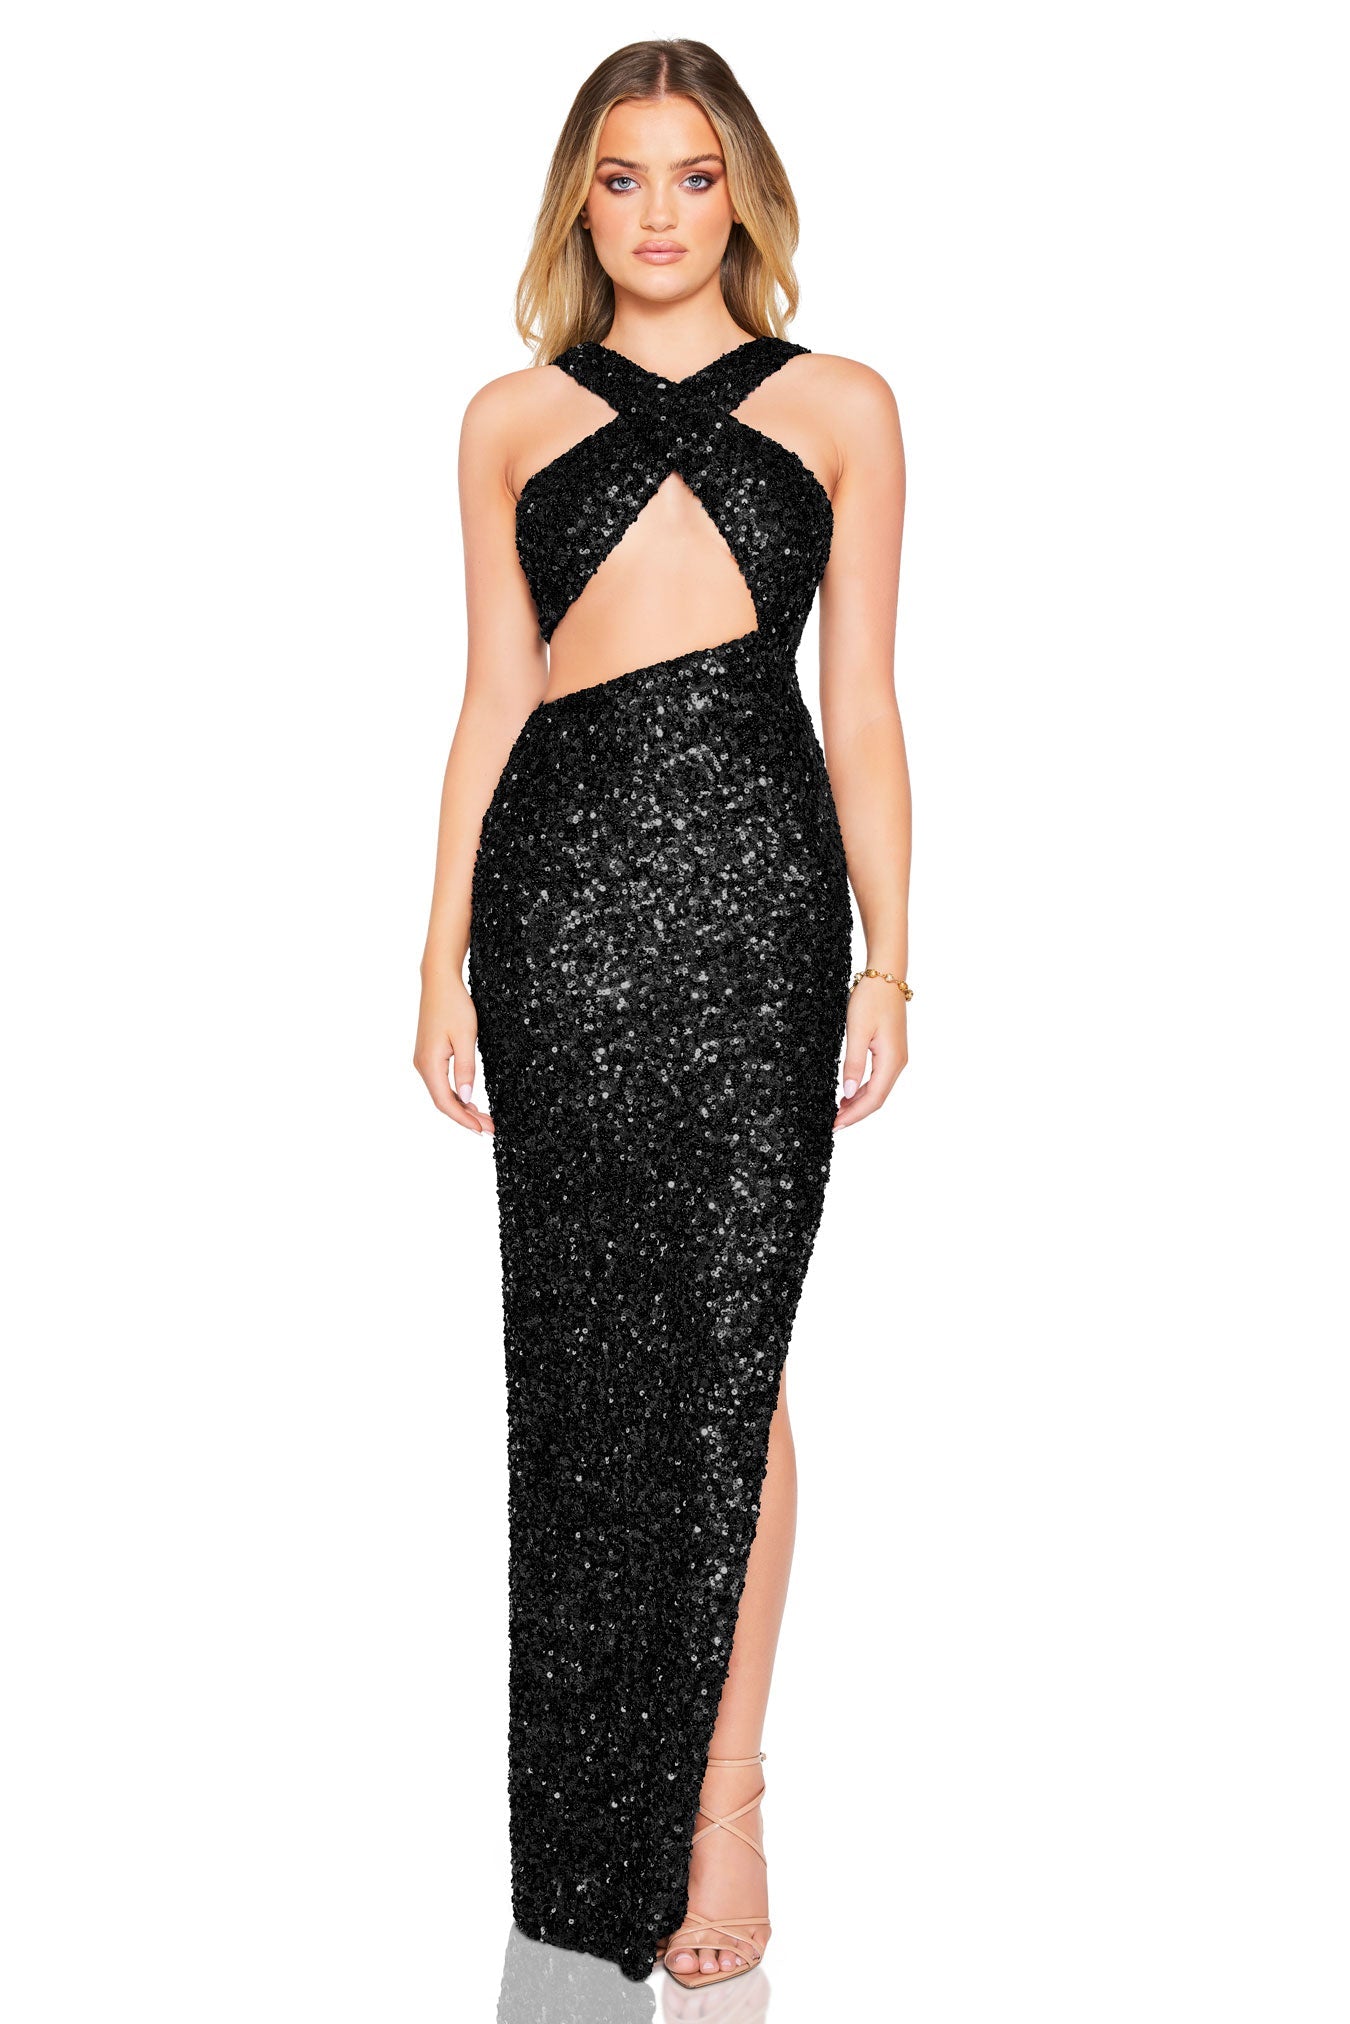 Luma Cut Out Gown - Nookie